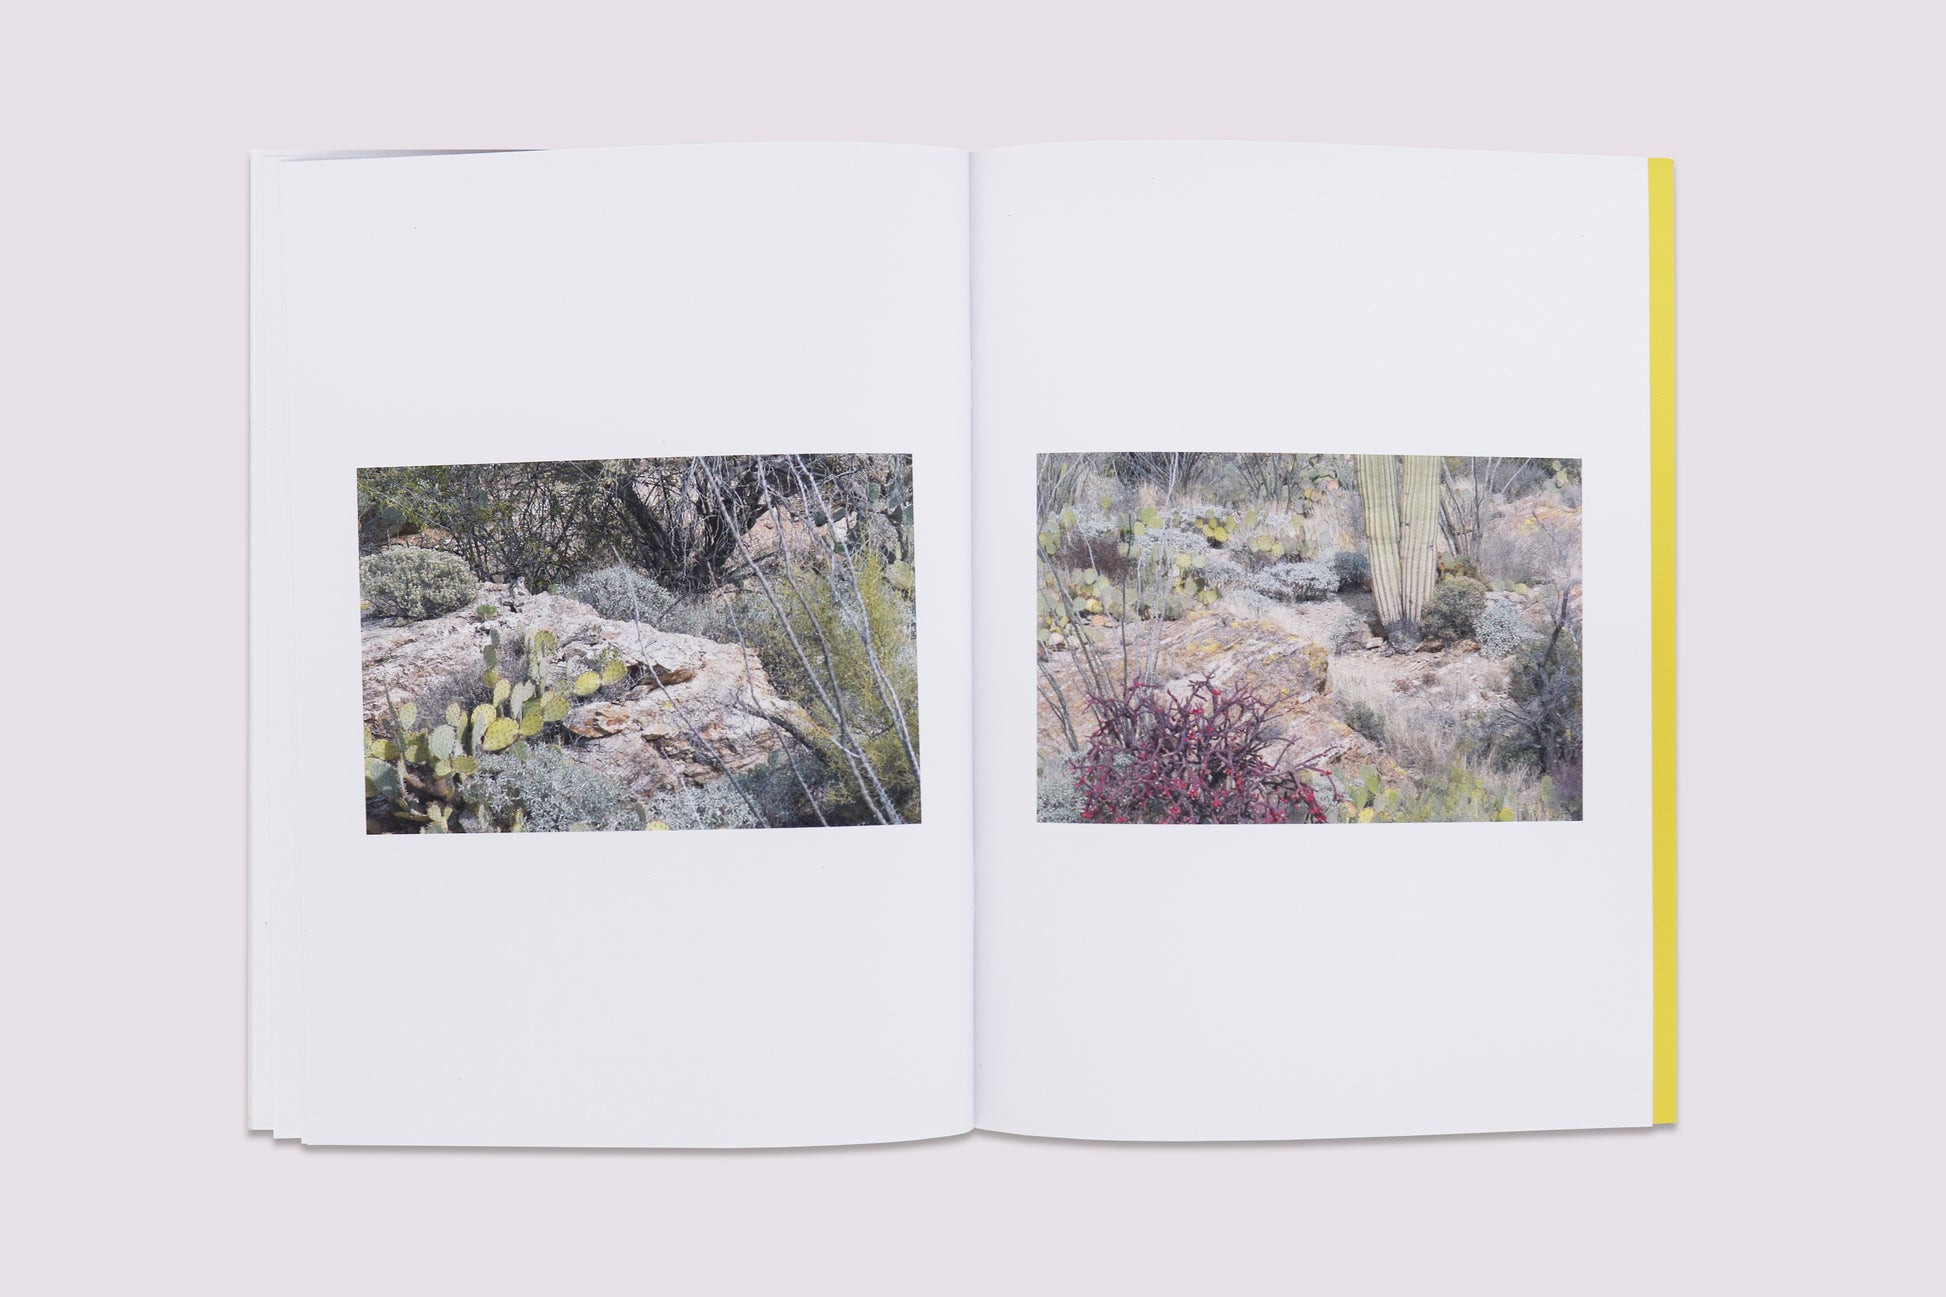 Ambient Park/Félicia Atkinson published by Perimeter Editions